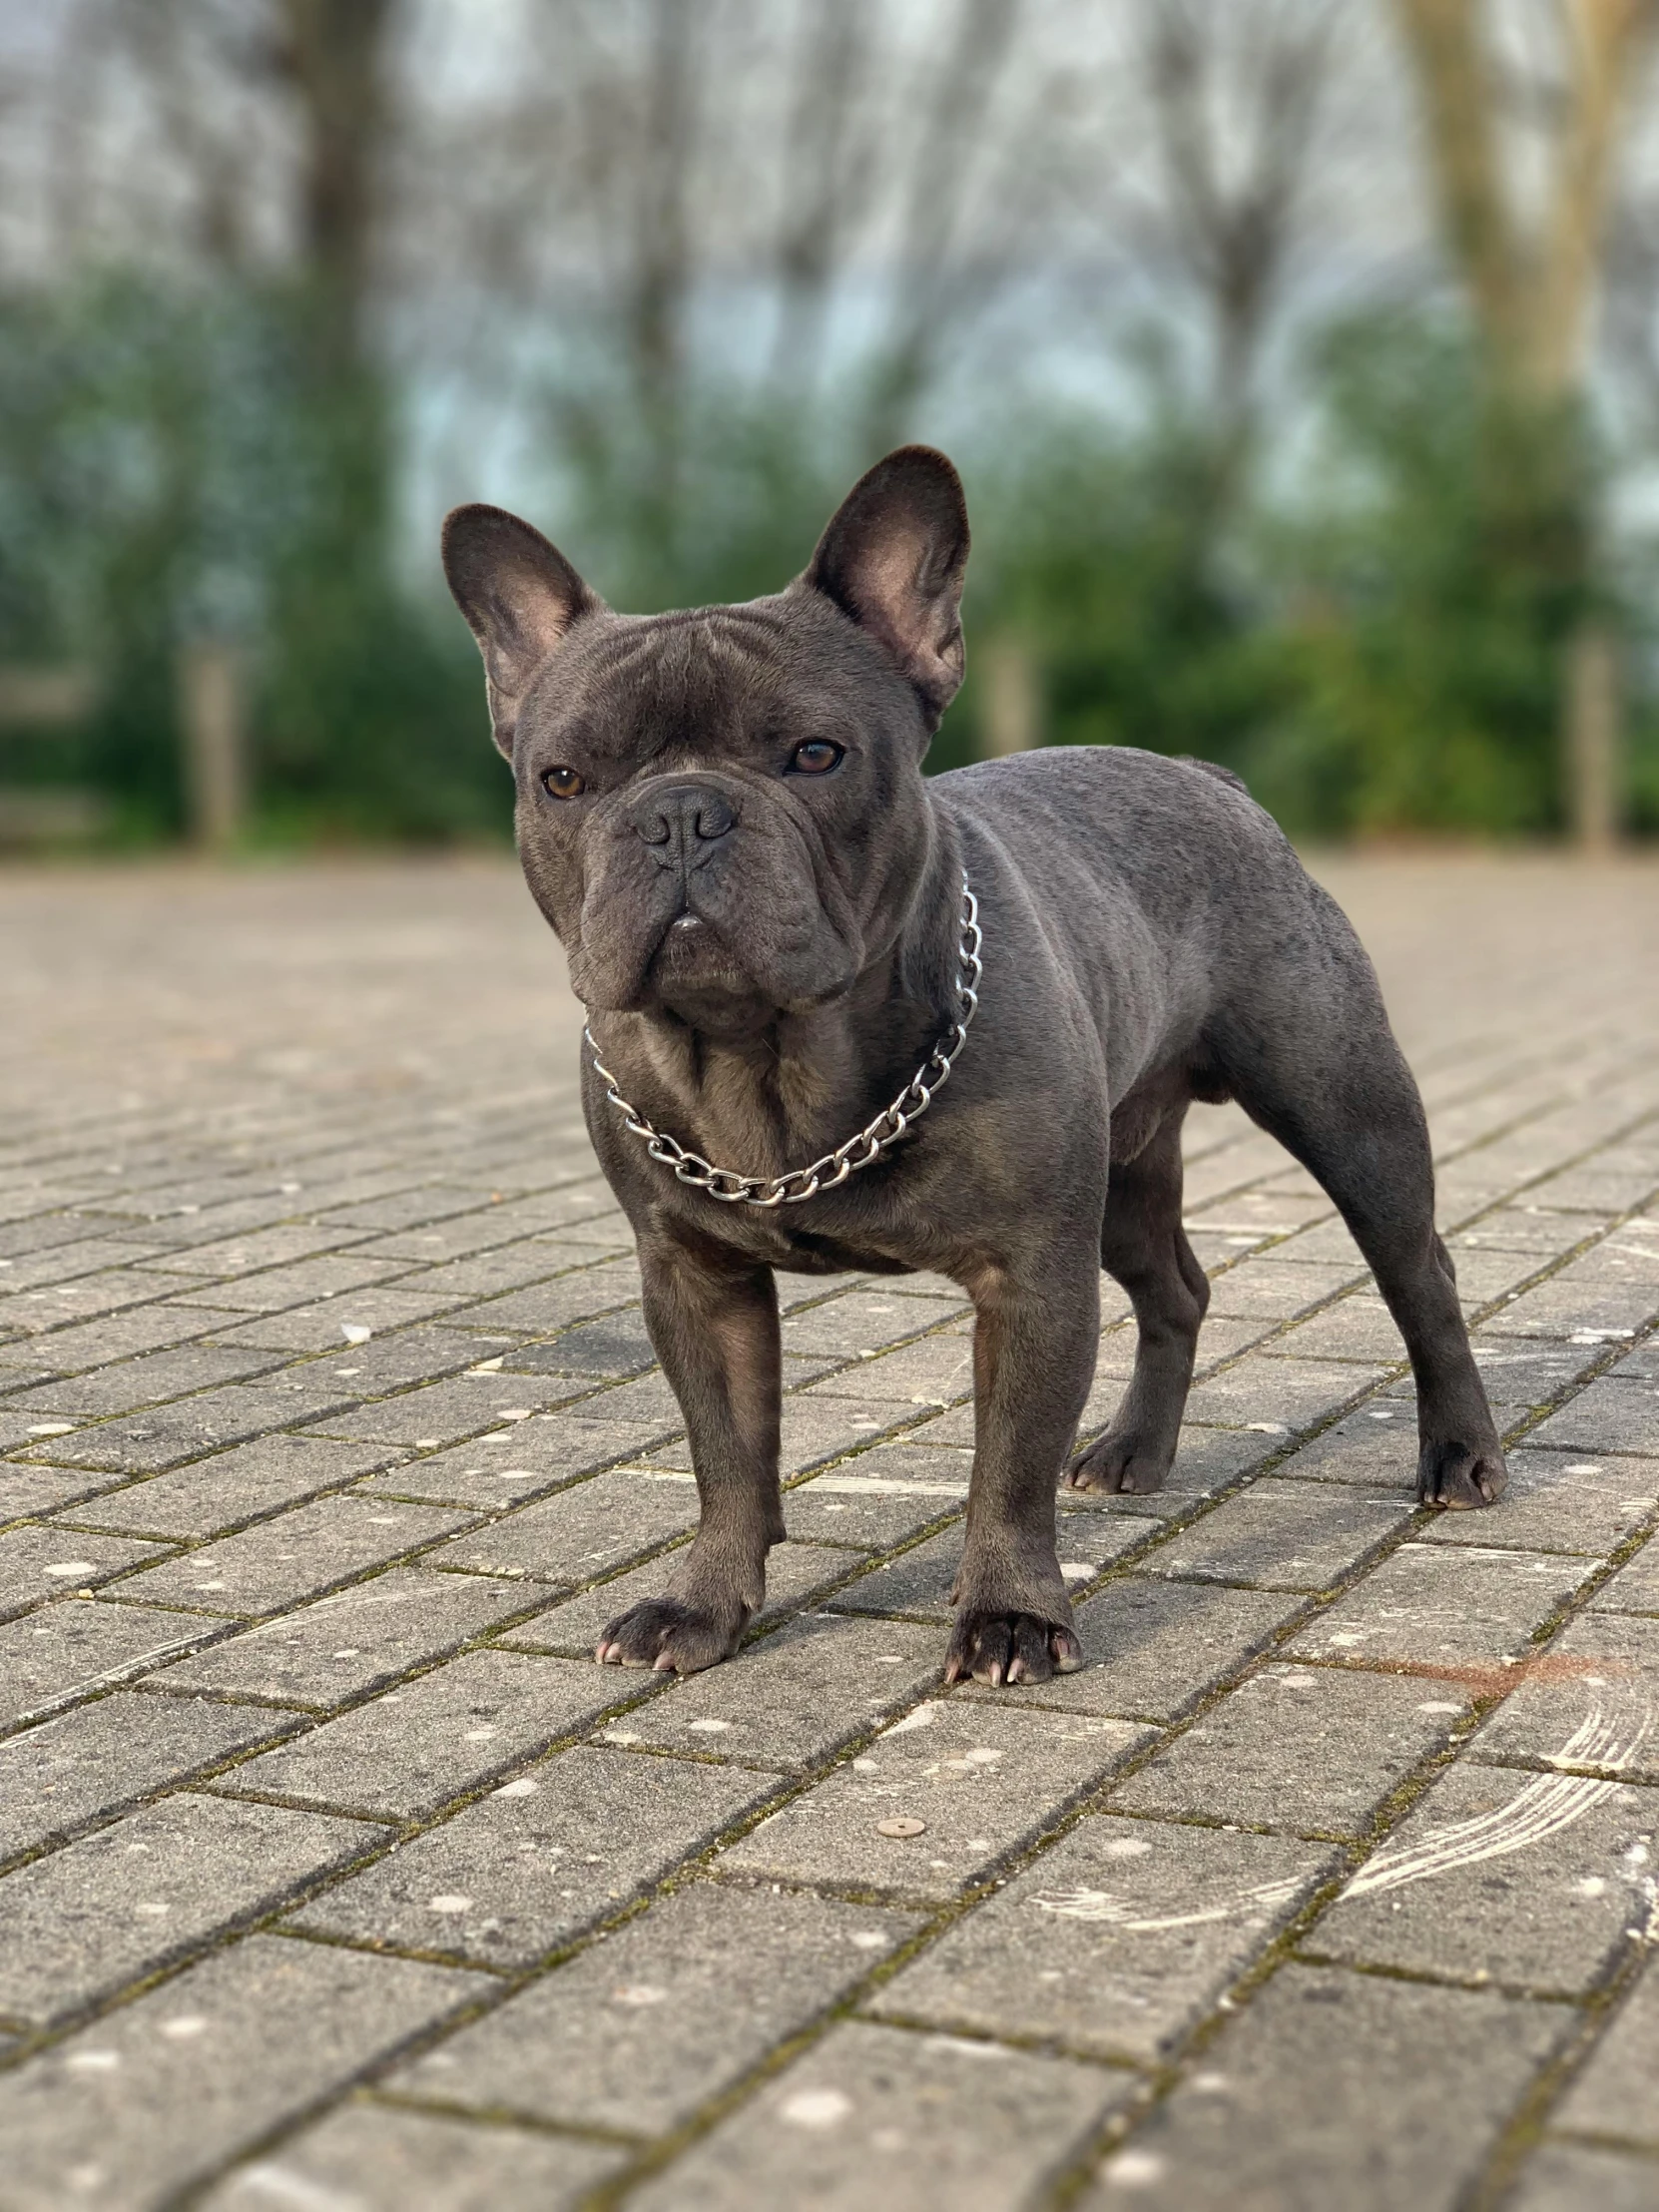 a small black dog standing on a brick walkway, by Jan Tengnagel, pexels contest winner, baroque, french bulldog, neck chains, in gunmetal grey, extremely polished